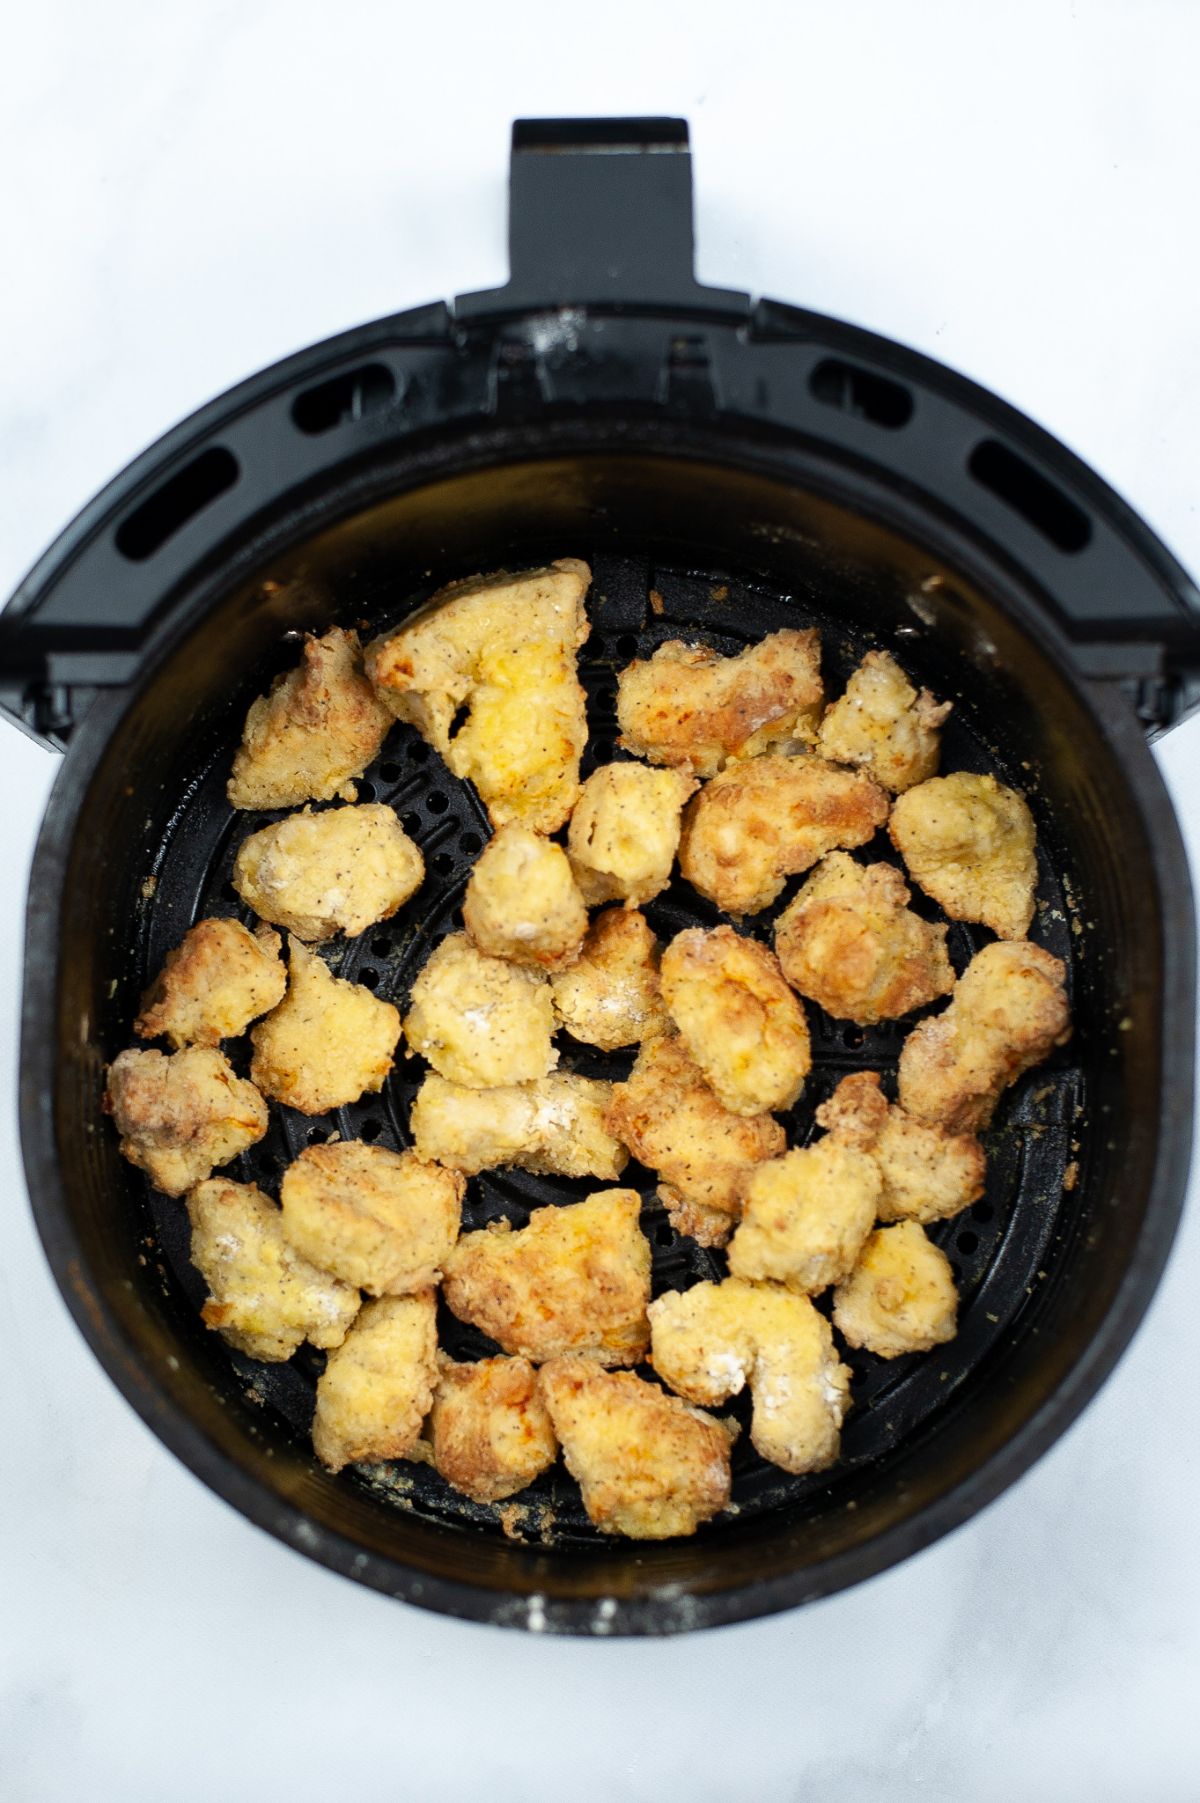 coated chicken cubes in an air fryer